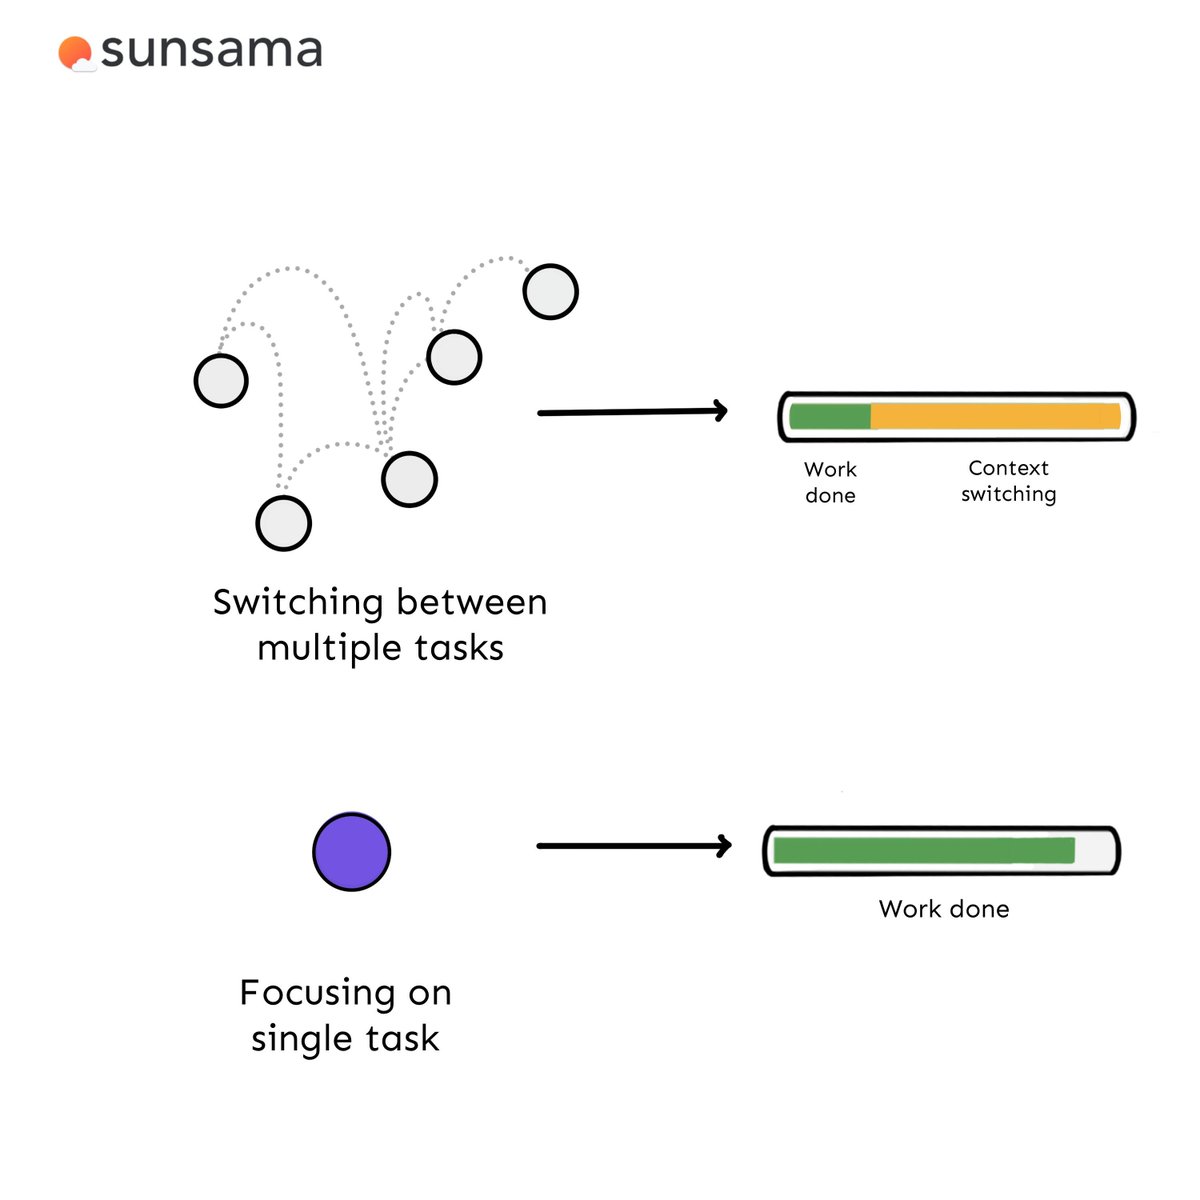 4️⃣ techniques to focus on a single task:

1. Pomodoro Technique
2. Timeboxing
3. Eliminating Distractions
4. Task Batching

Which one have you tried? 

🌻 Use Sunsama's Focus Mode to get in the flow state and get work done.  

Claim your free trial: buff.ly/3RXmD6a